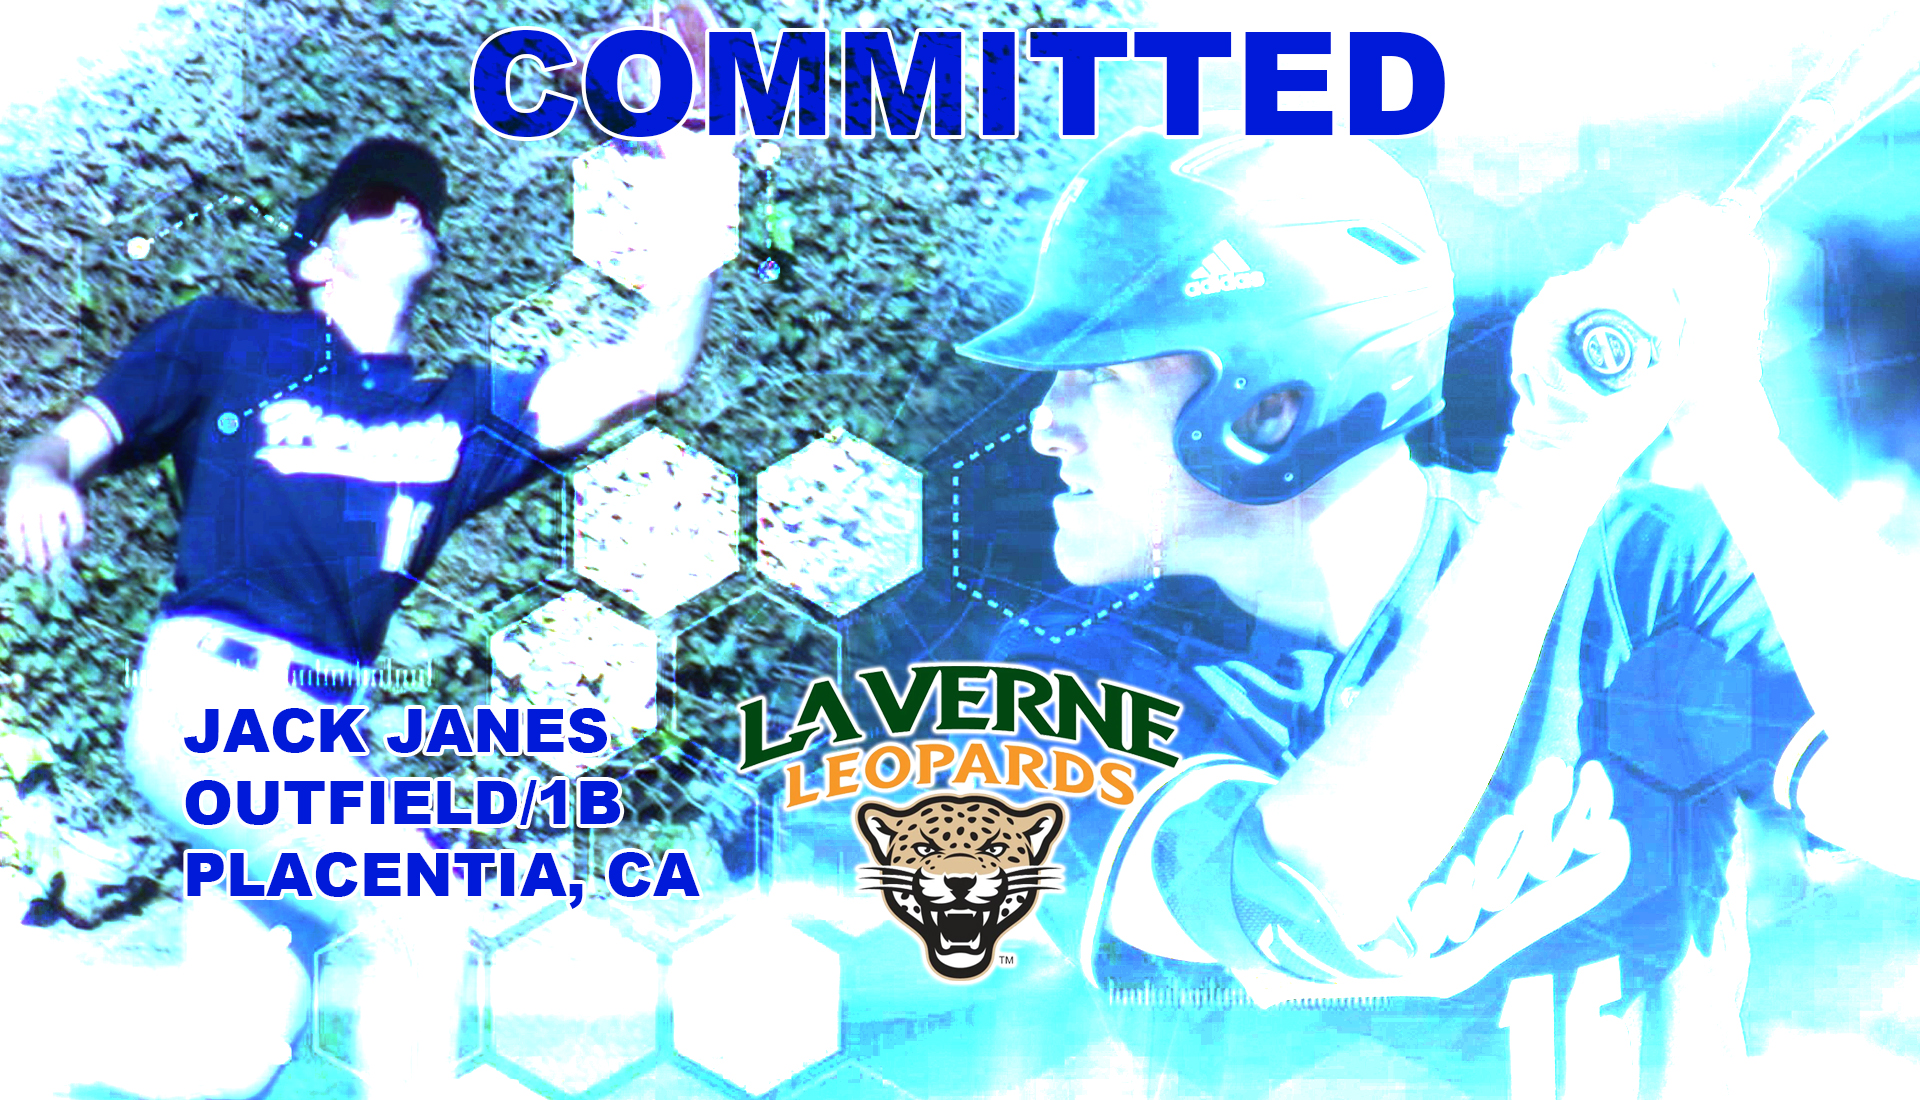 JANES GOING WITH LA VERNE